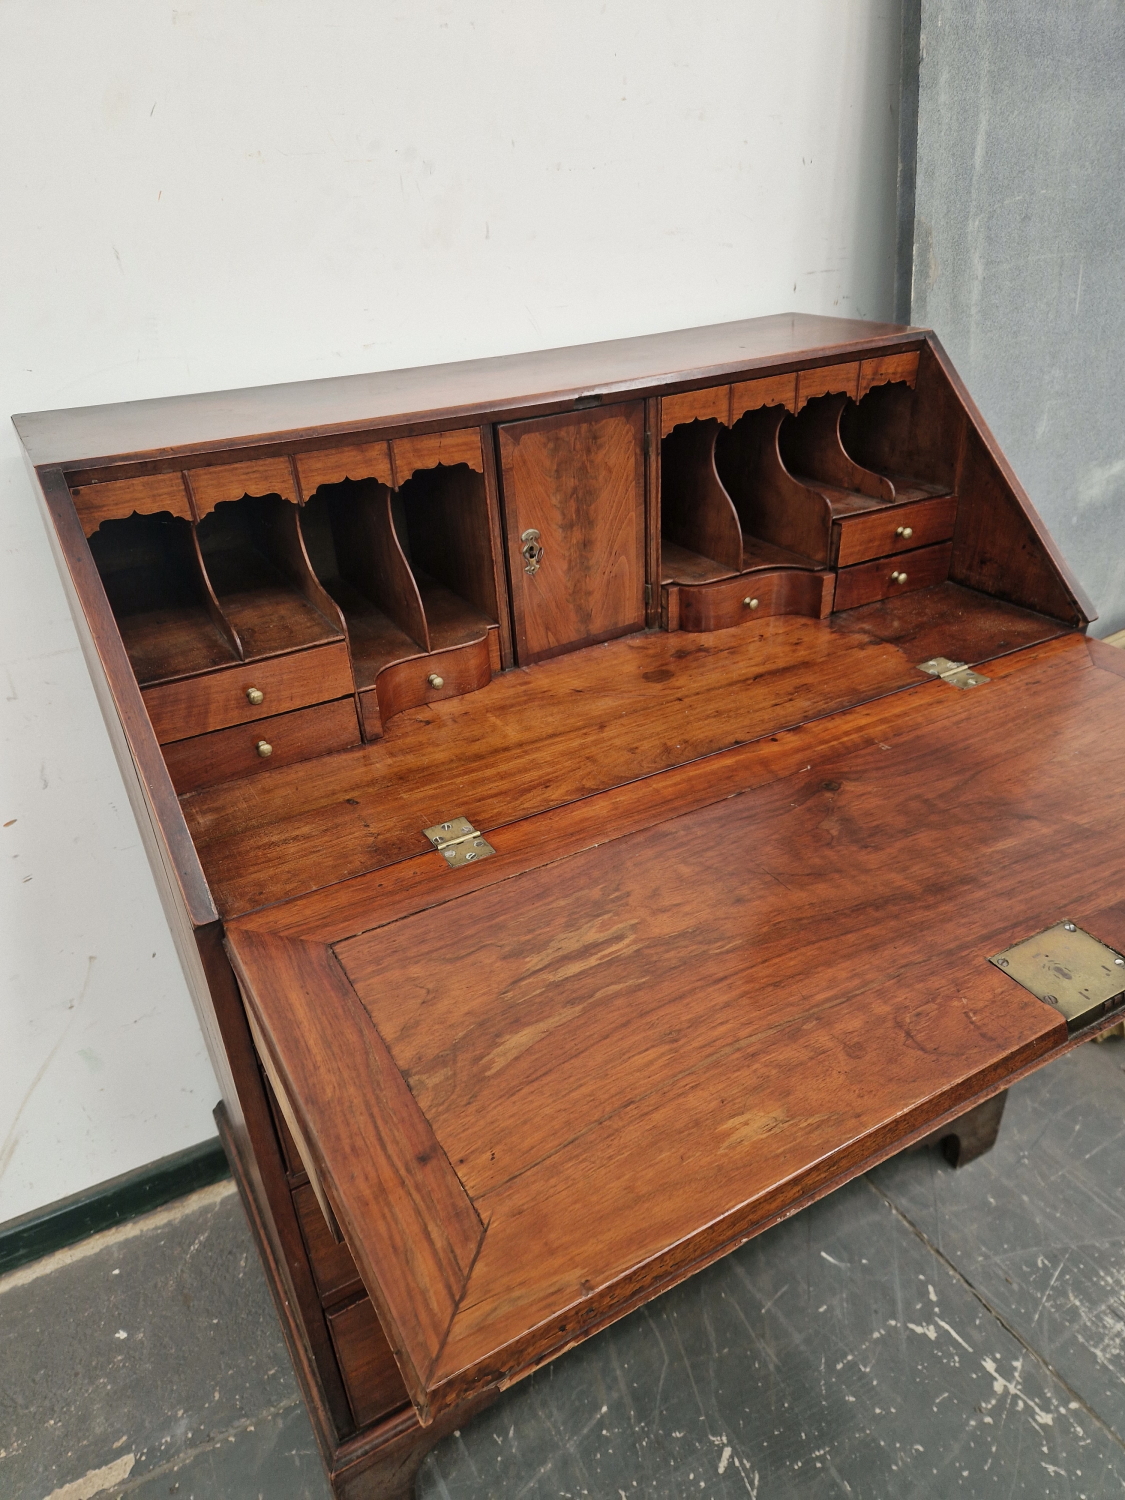 A GEORGE III FRUIT WOOD BUREAU, THE FALL ABOVE FOUR GRADED DRAWERS - Image 3 of 6